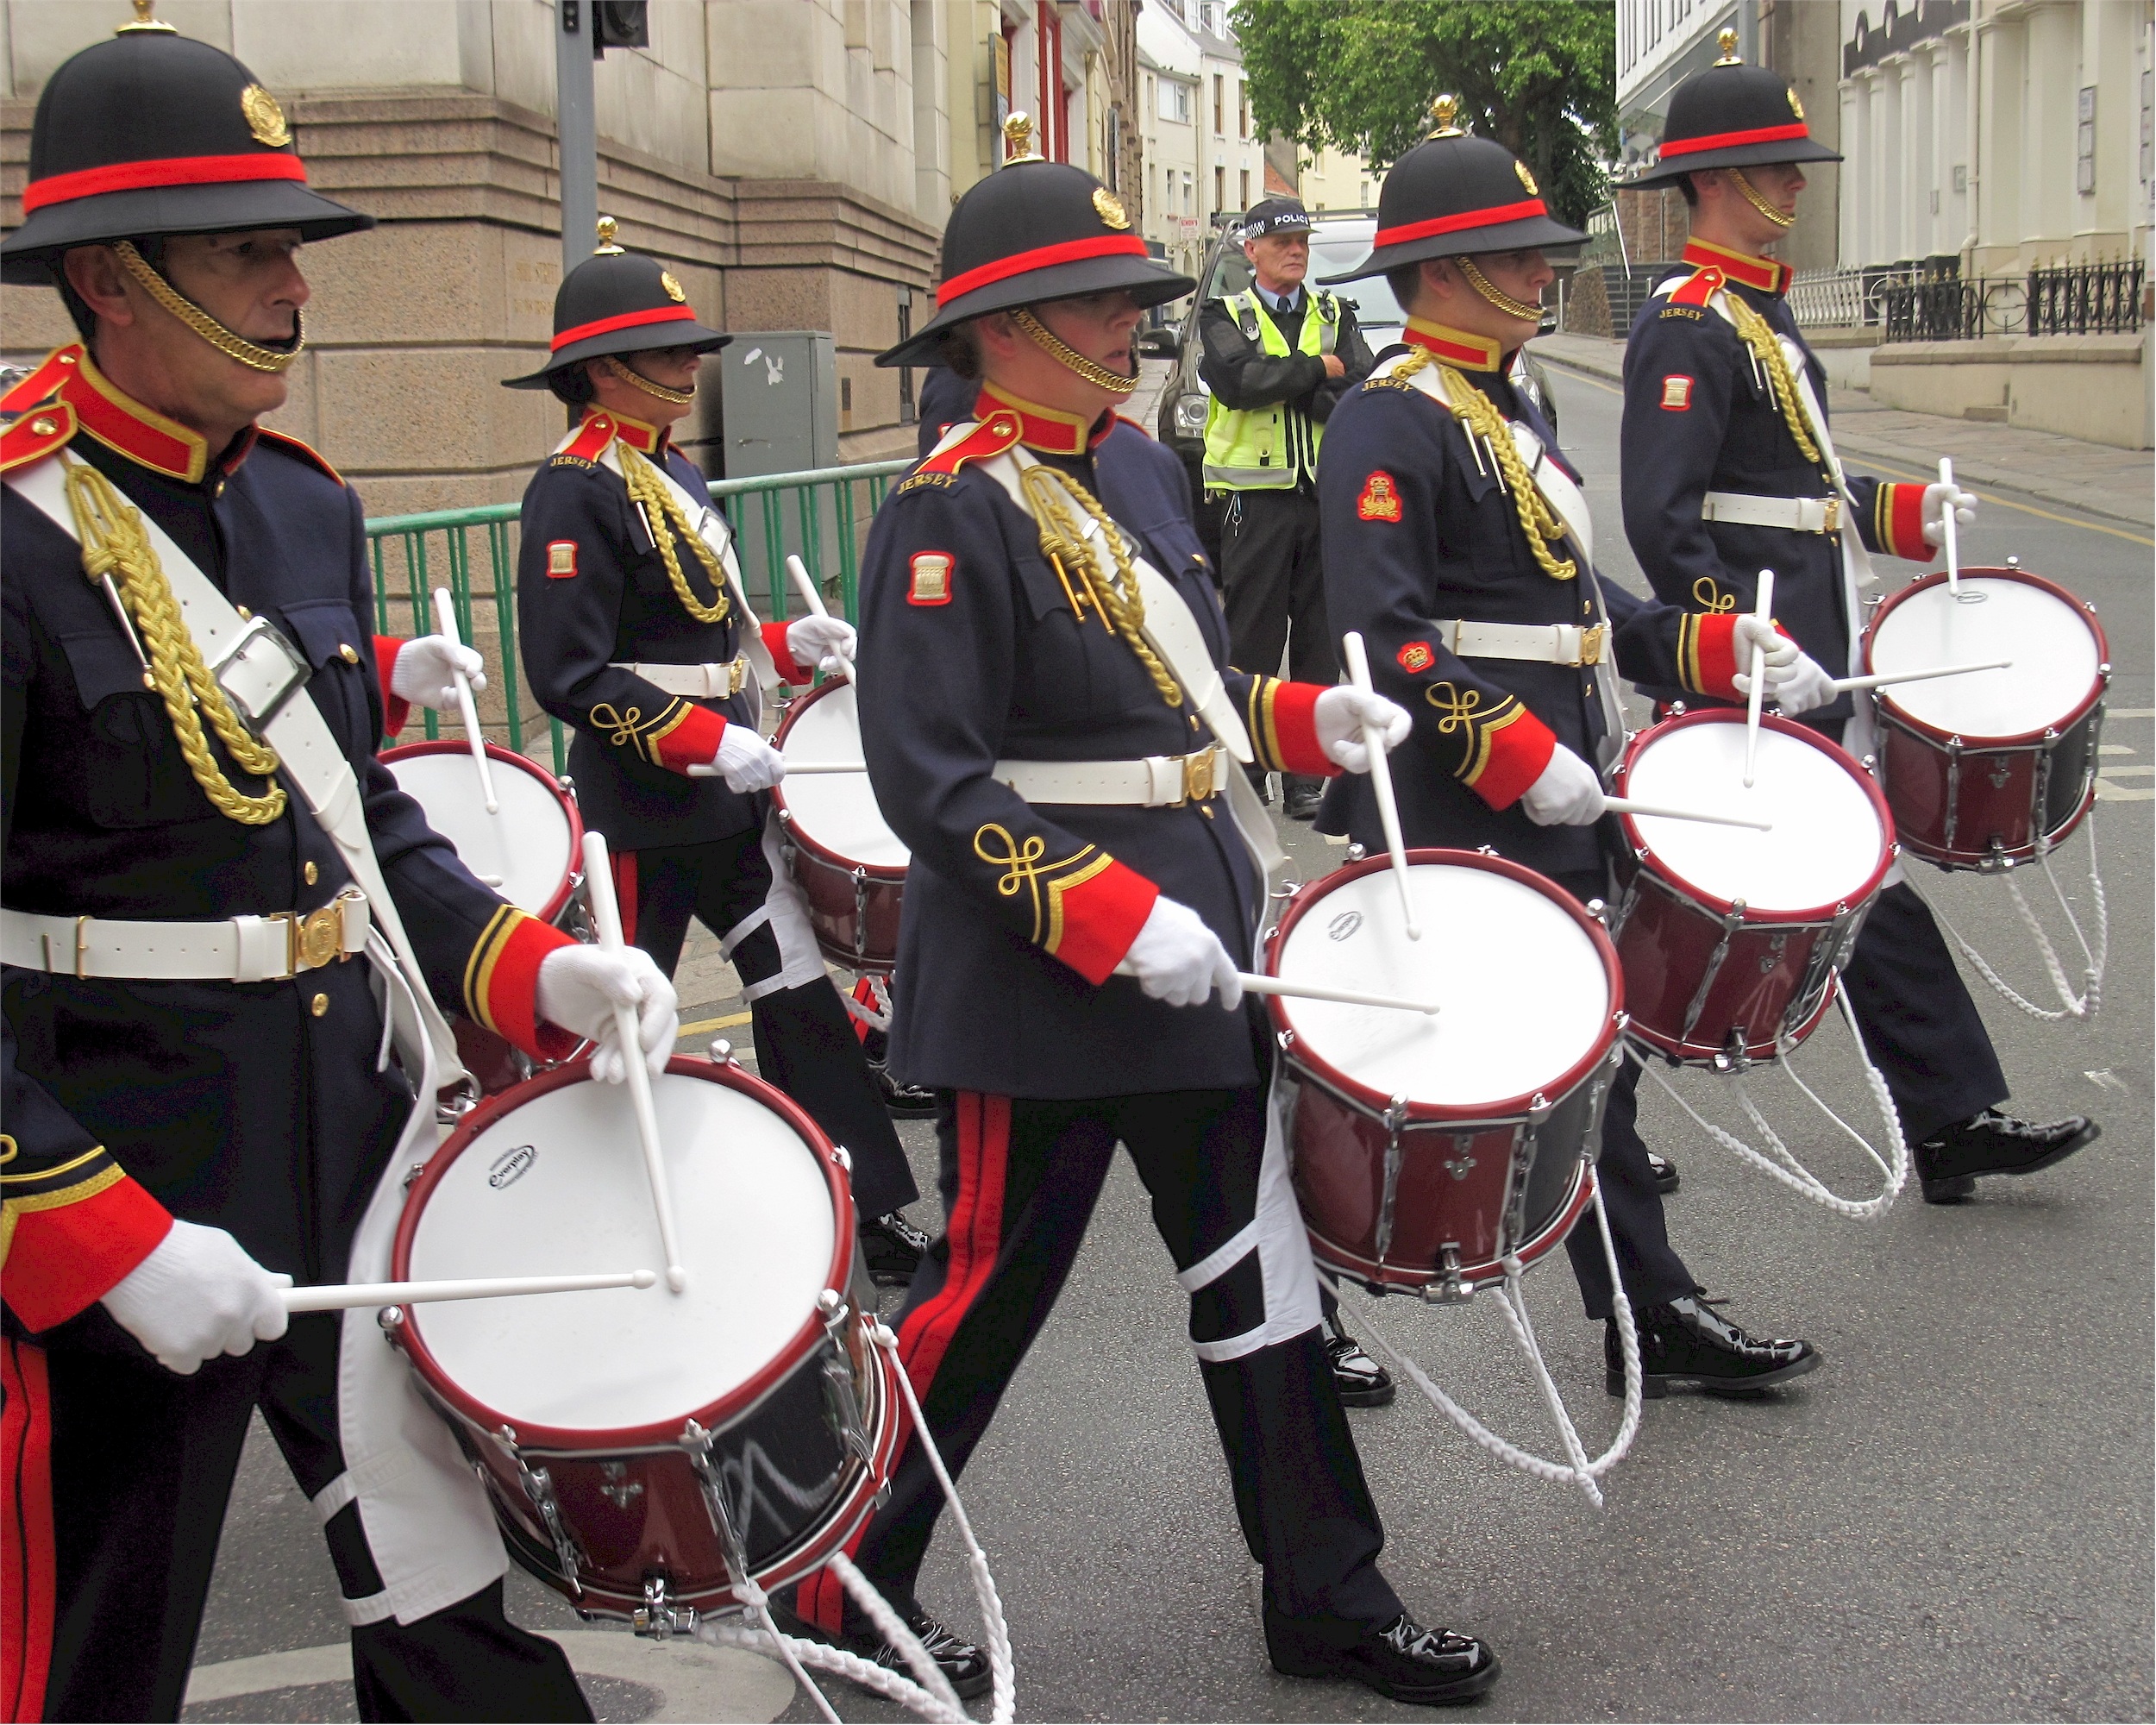 Drummers Marching, Army, Drummer, Force, March, HQ Photo